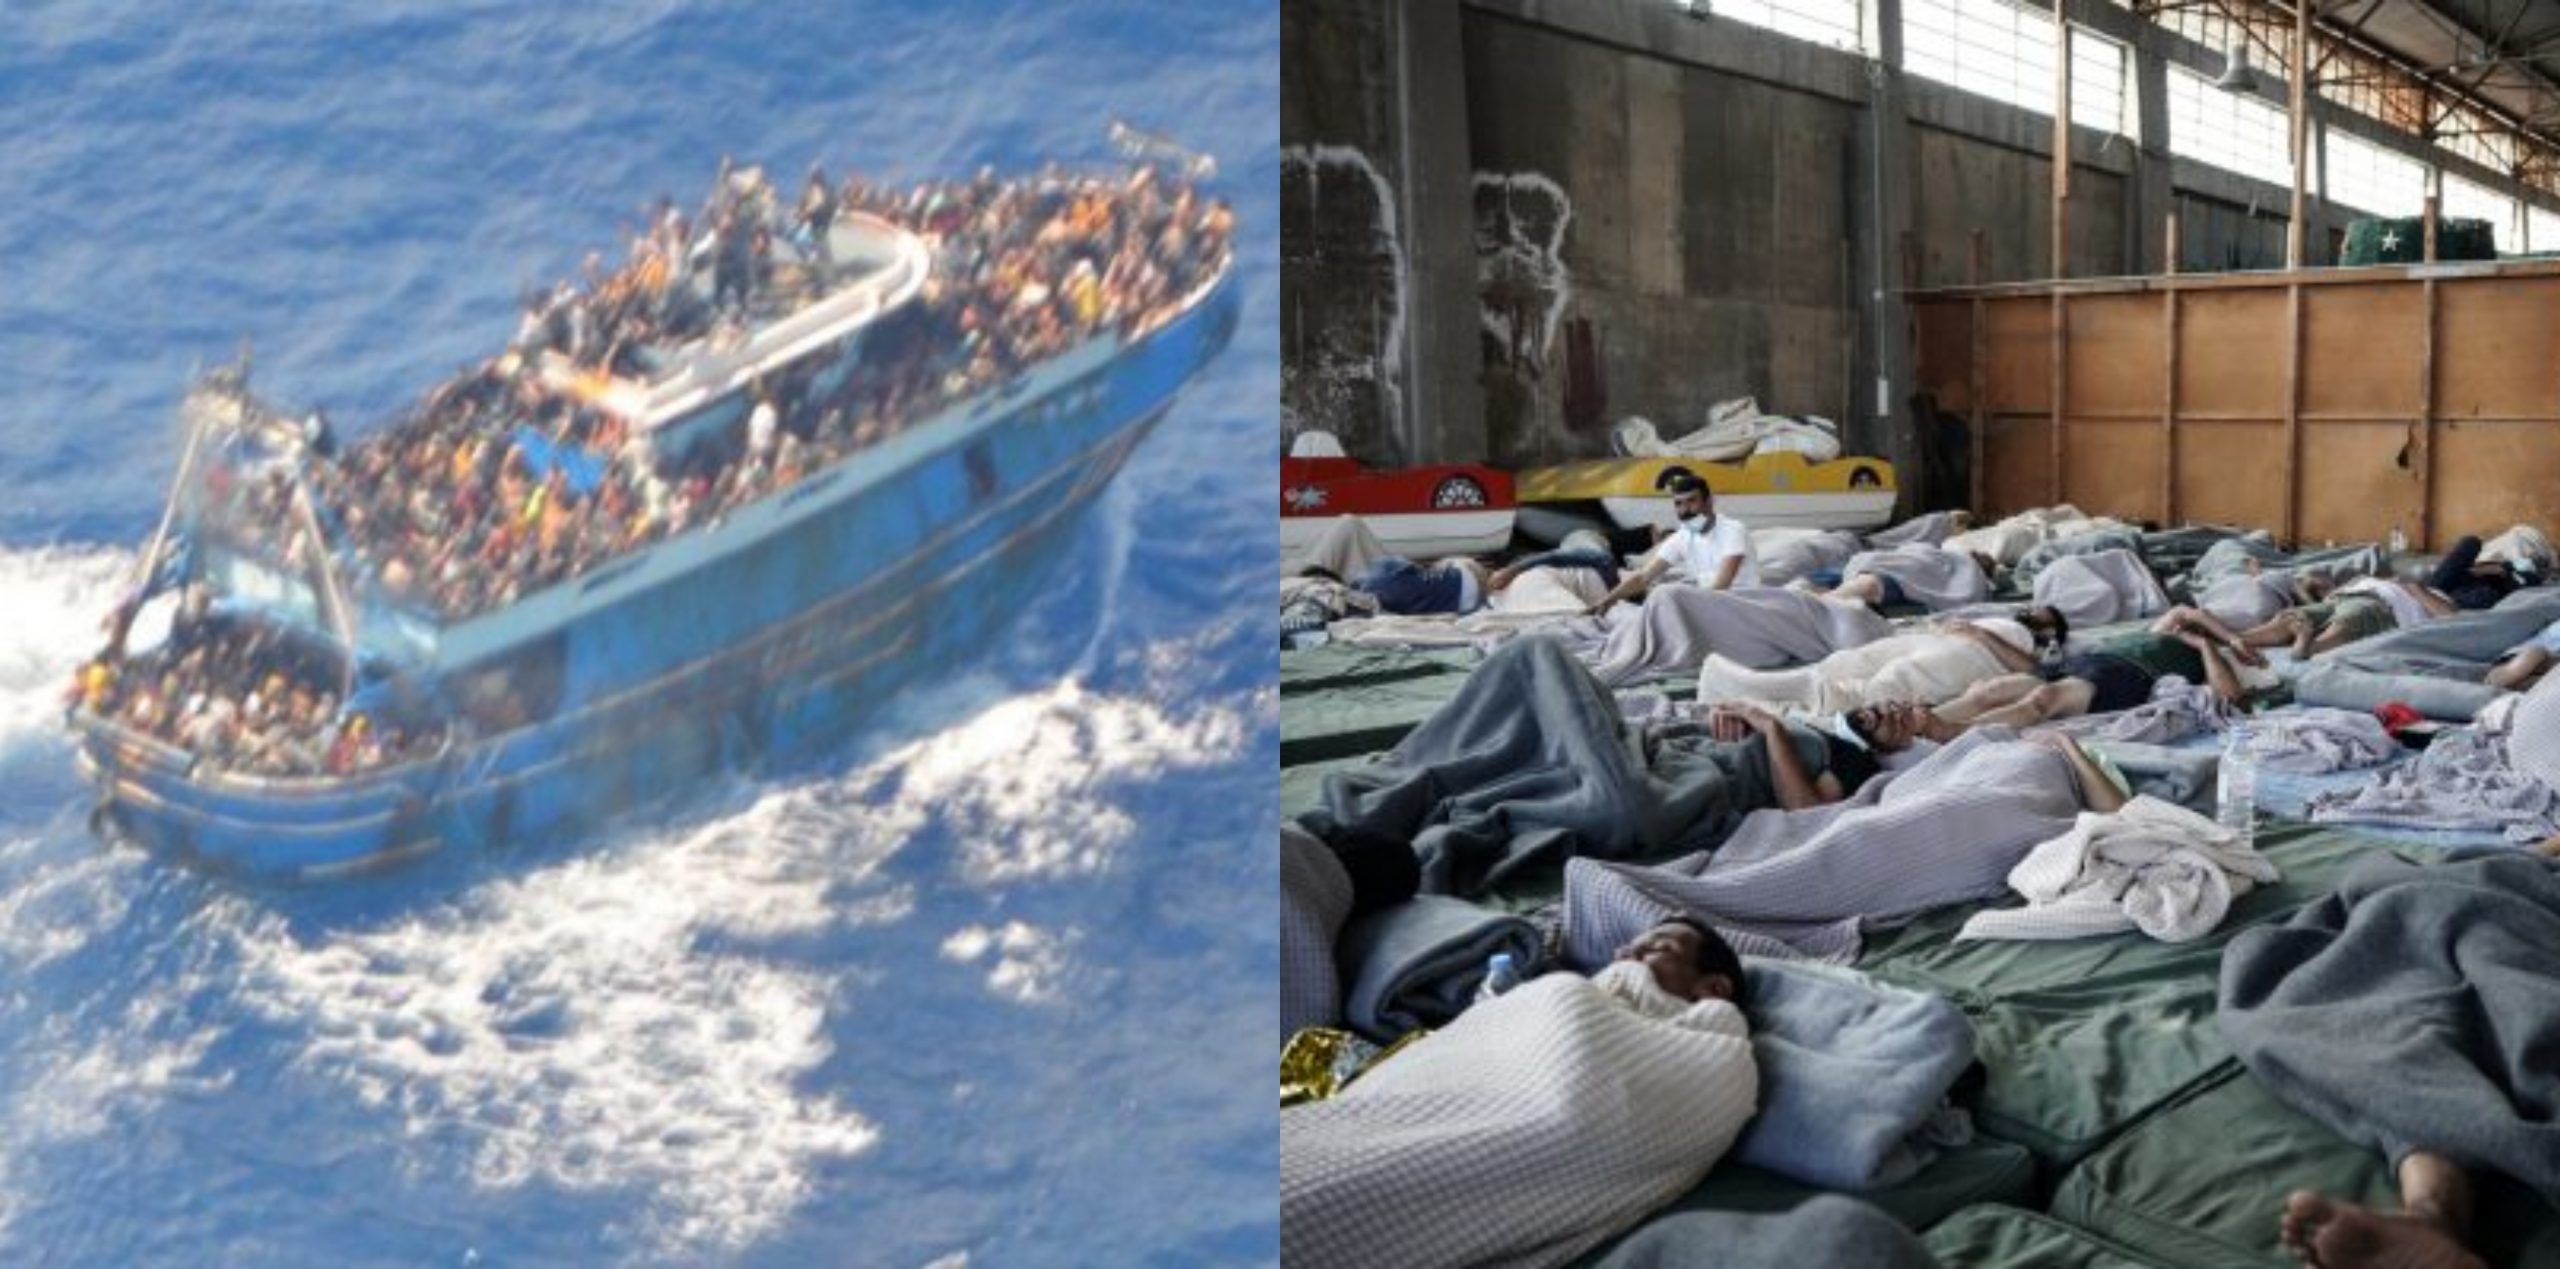 Pylos Shipwreck: Depositions of the nine accused for trafficking on Monday – Questions about the actions of the Coast Guard